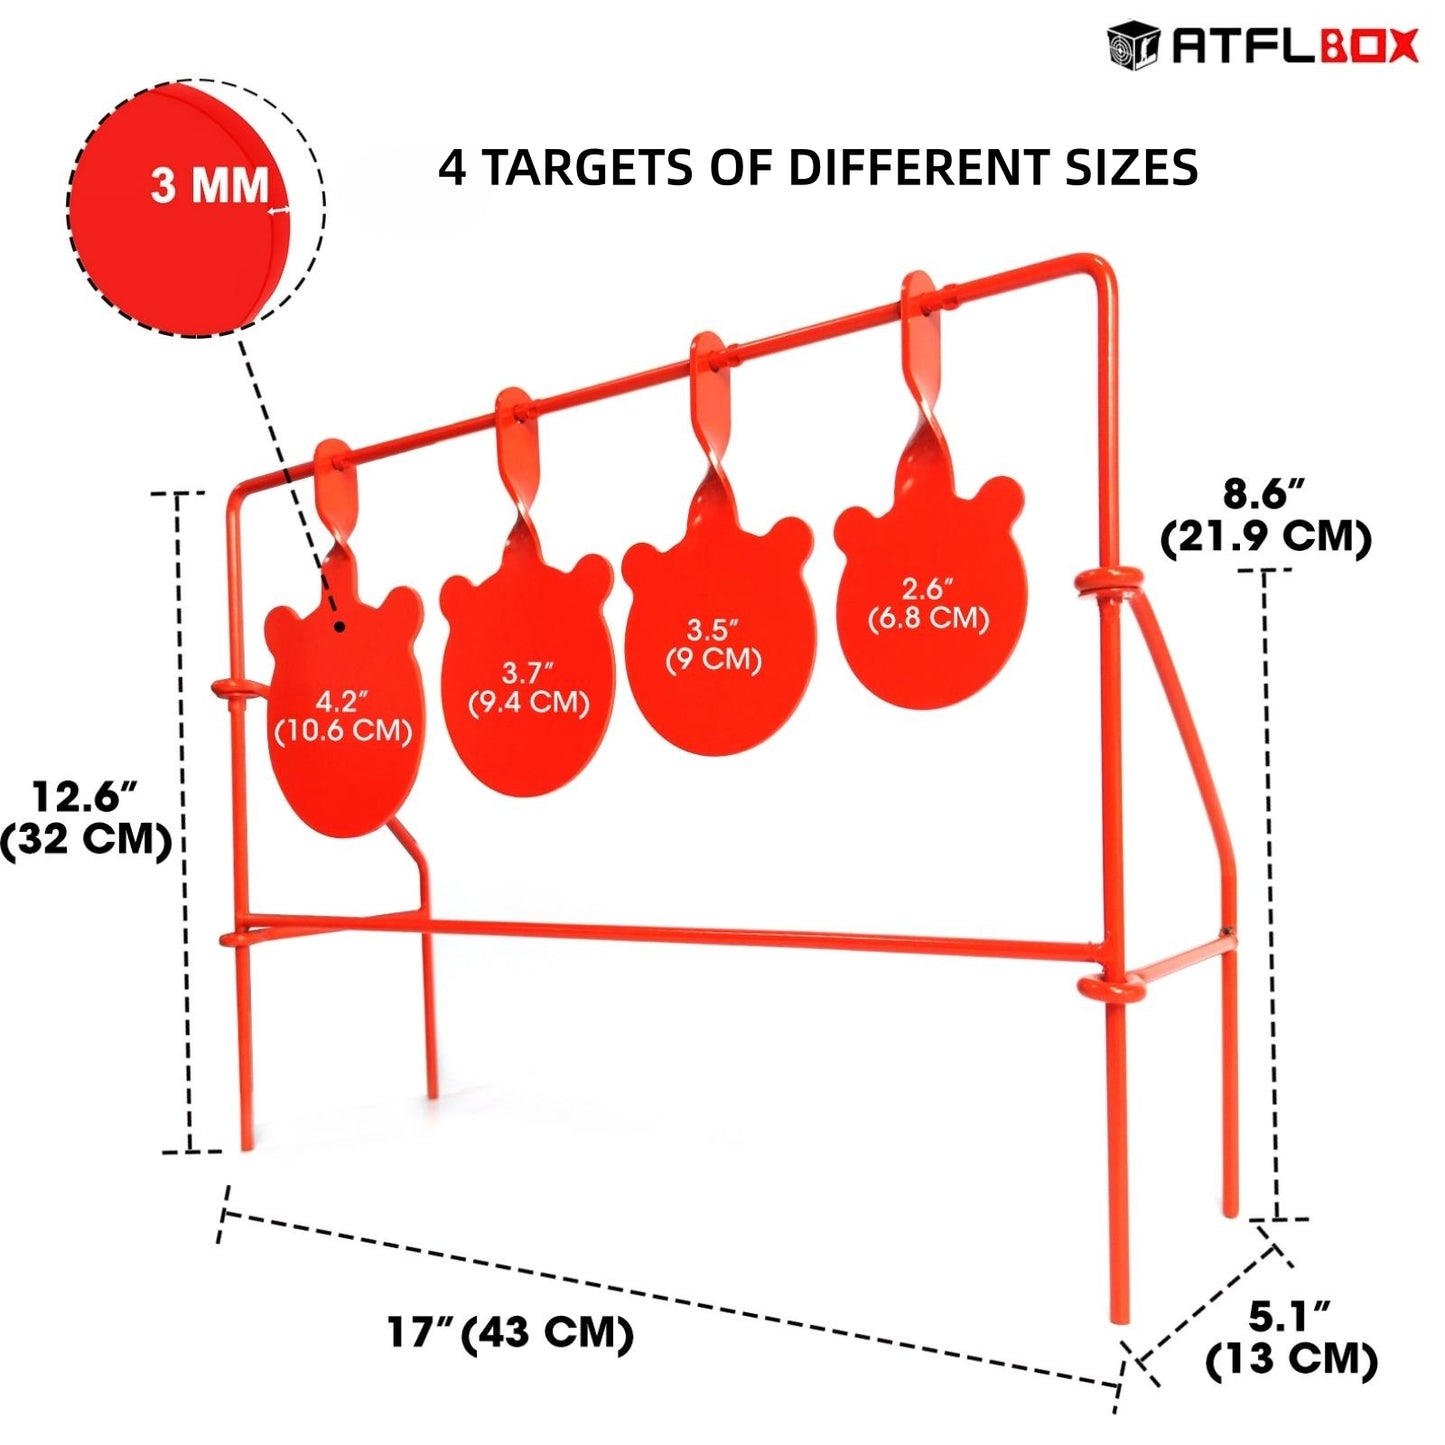 ATFLBOX BB Gun Target 4 different sized gongs Heavy Metal Spinning Pellet Airgun Airsoft Shooting Target for Outdoor, Rated for .177 .20 Caliber